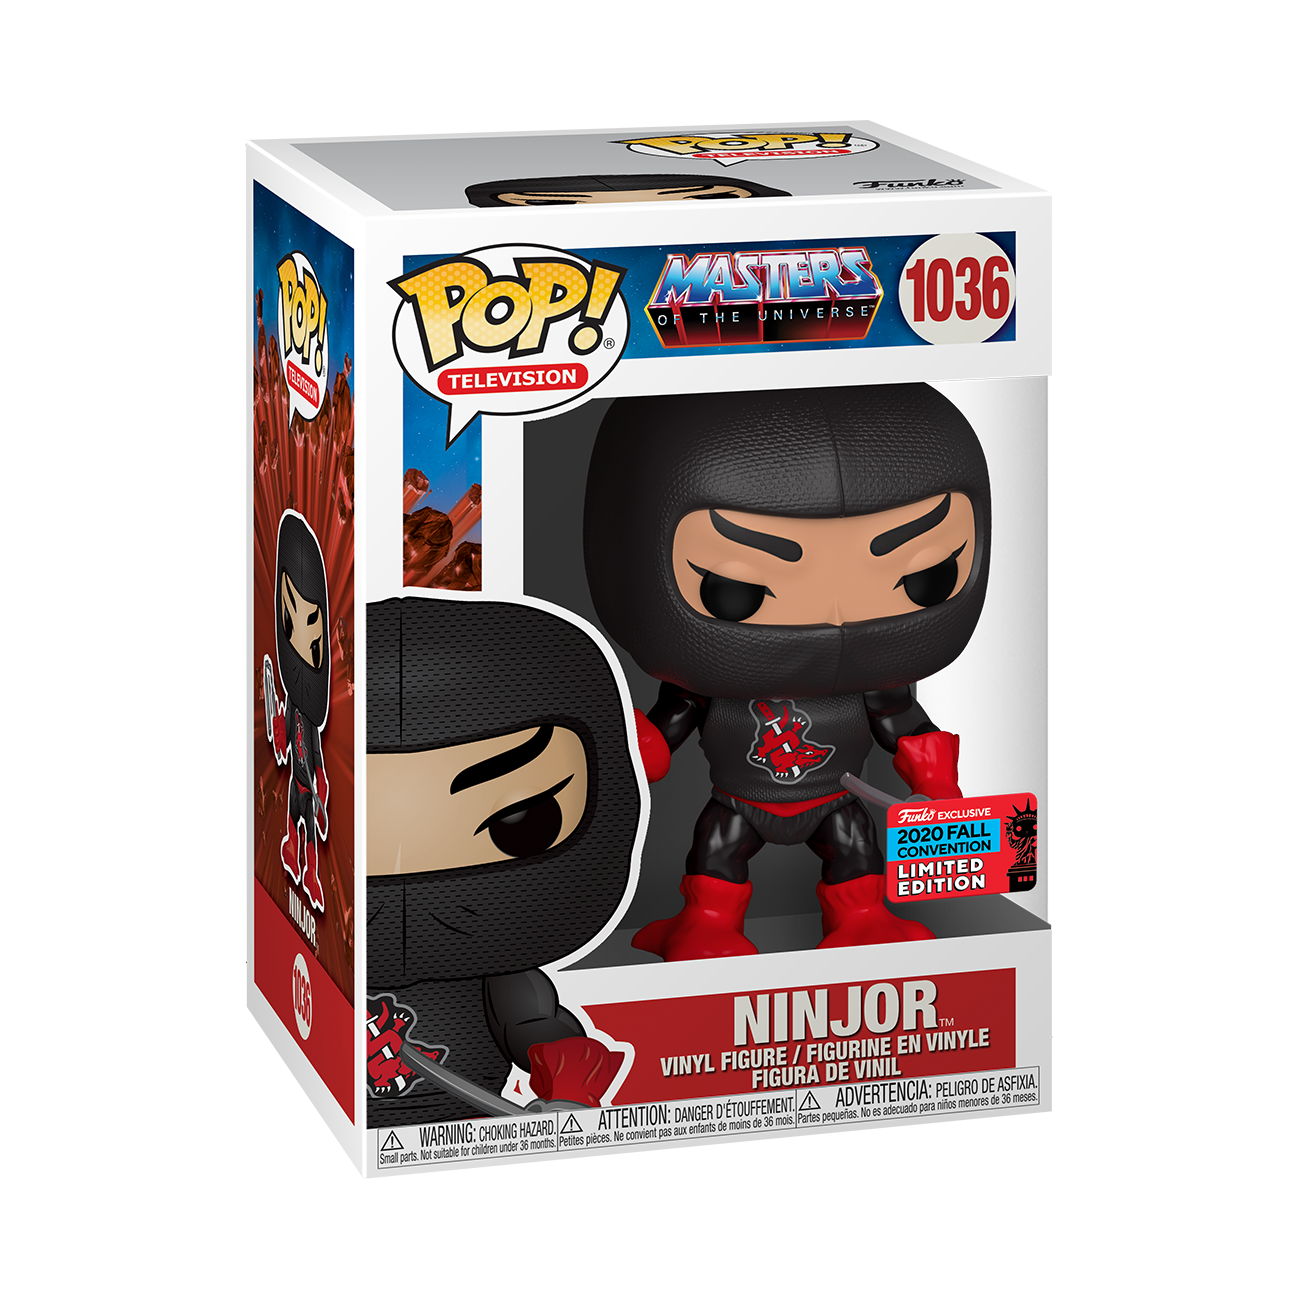 Funko Pop! Animation - Master Of The Universe #1036 - Ninjor (Fall Convention 2020 Exclusive)